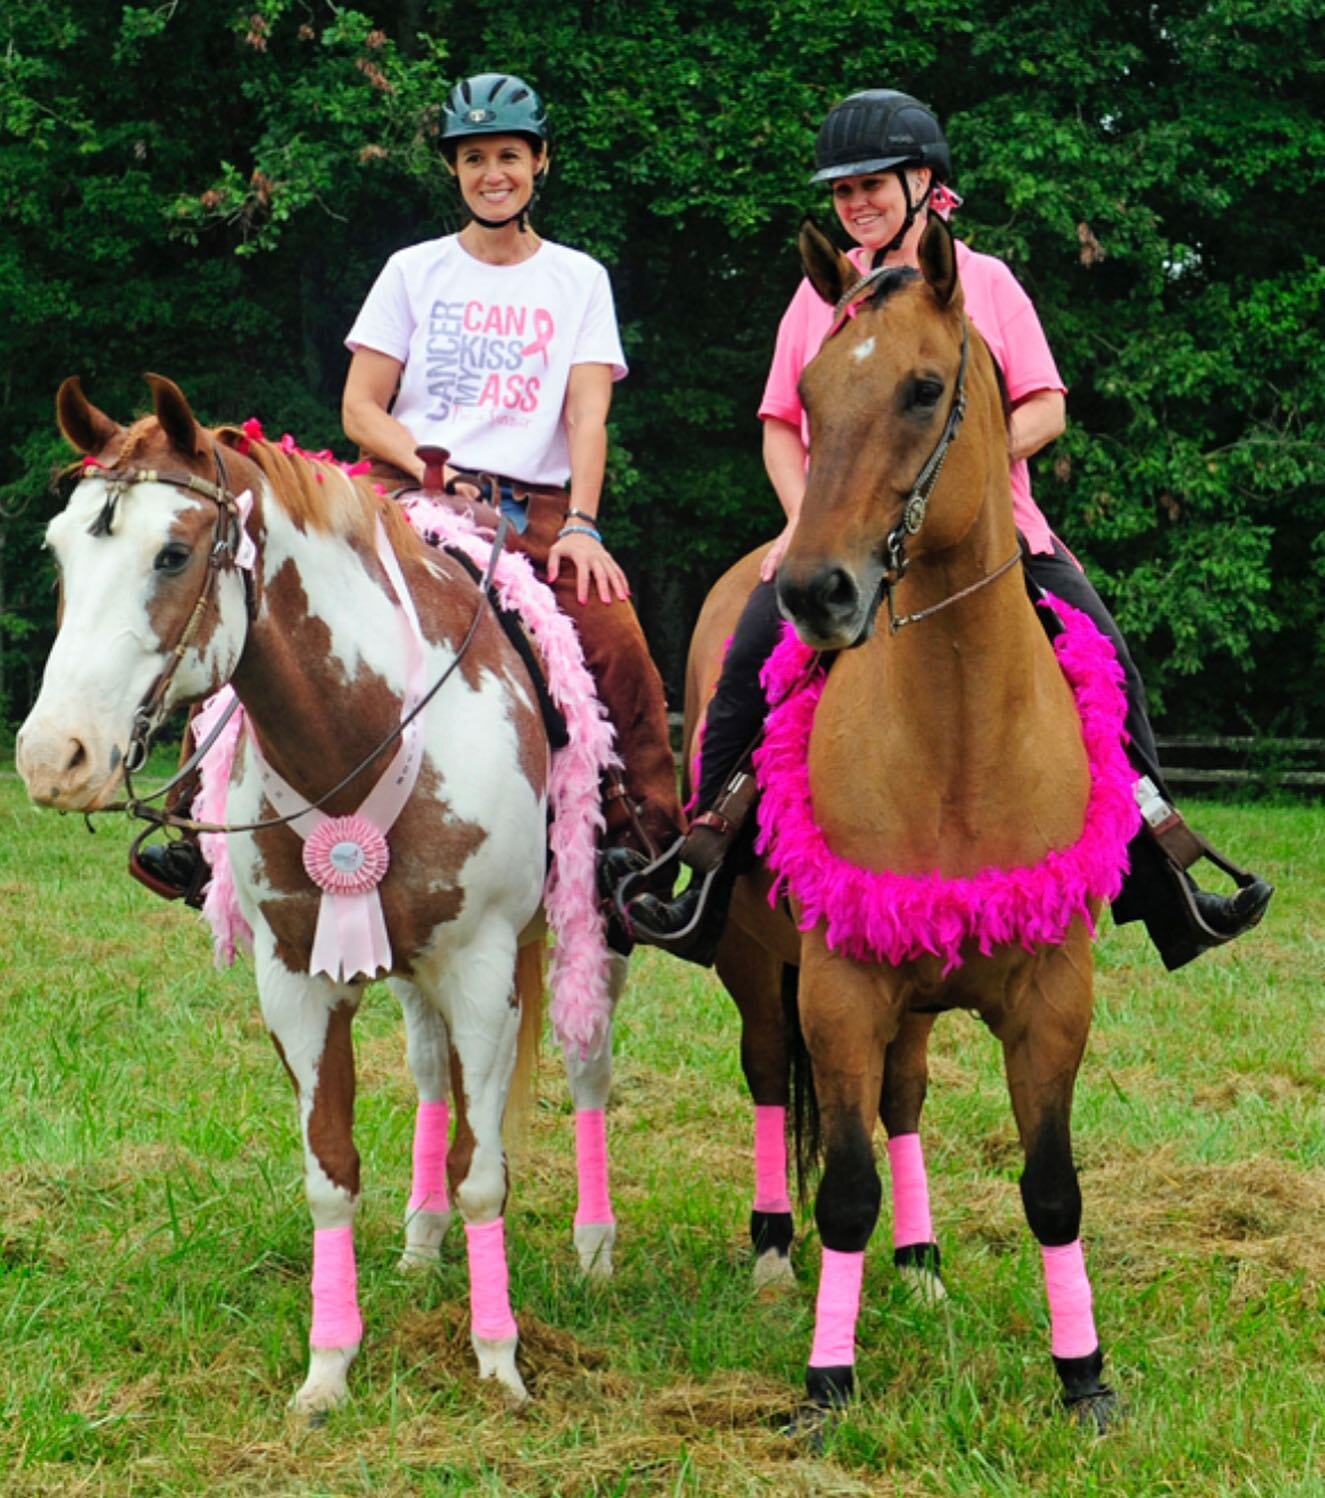 The countdown begins! One week till the our super fun pink show!! Thrills In The Hills Benefit Show. Please get entries in so we can provide you with time estimates closer to the day!
Raffle tables, great prizes, trainer gift bags, MexItalē Kitchen, 